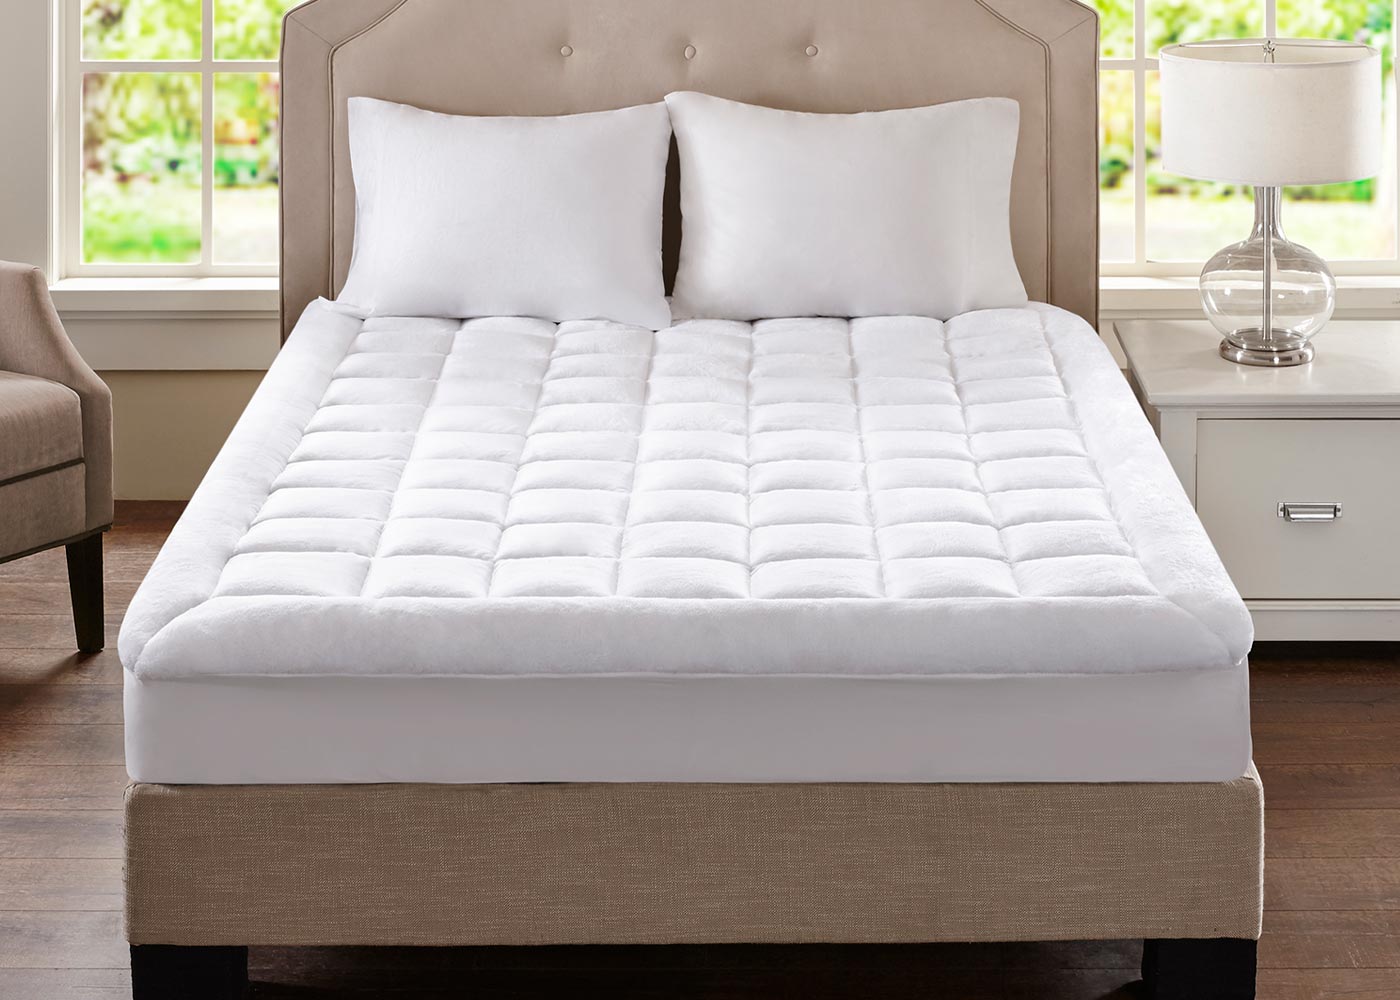 Quilted Mattress Pad Cover Waterproof Mattress Protector Soft